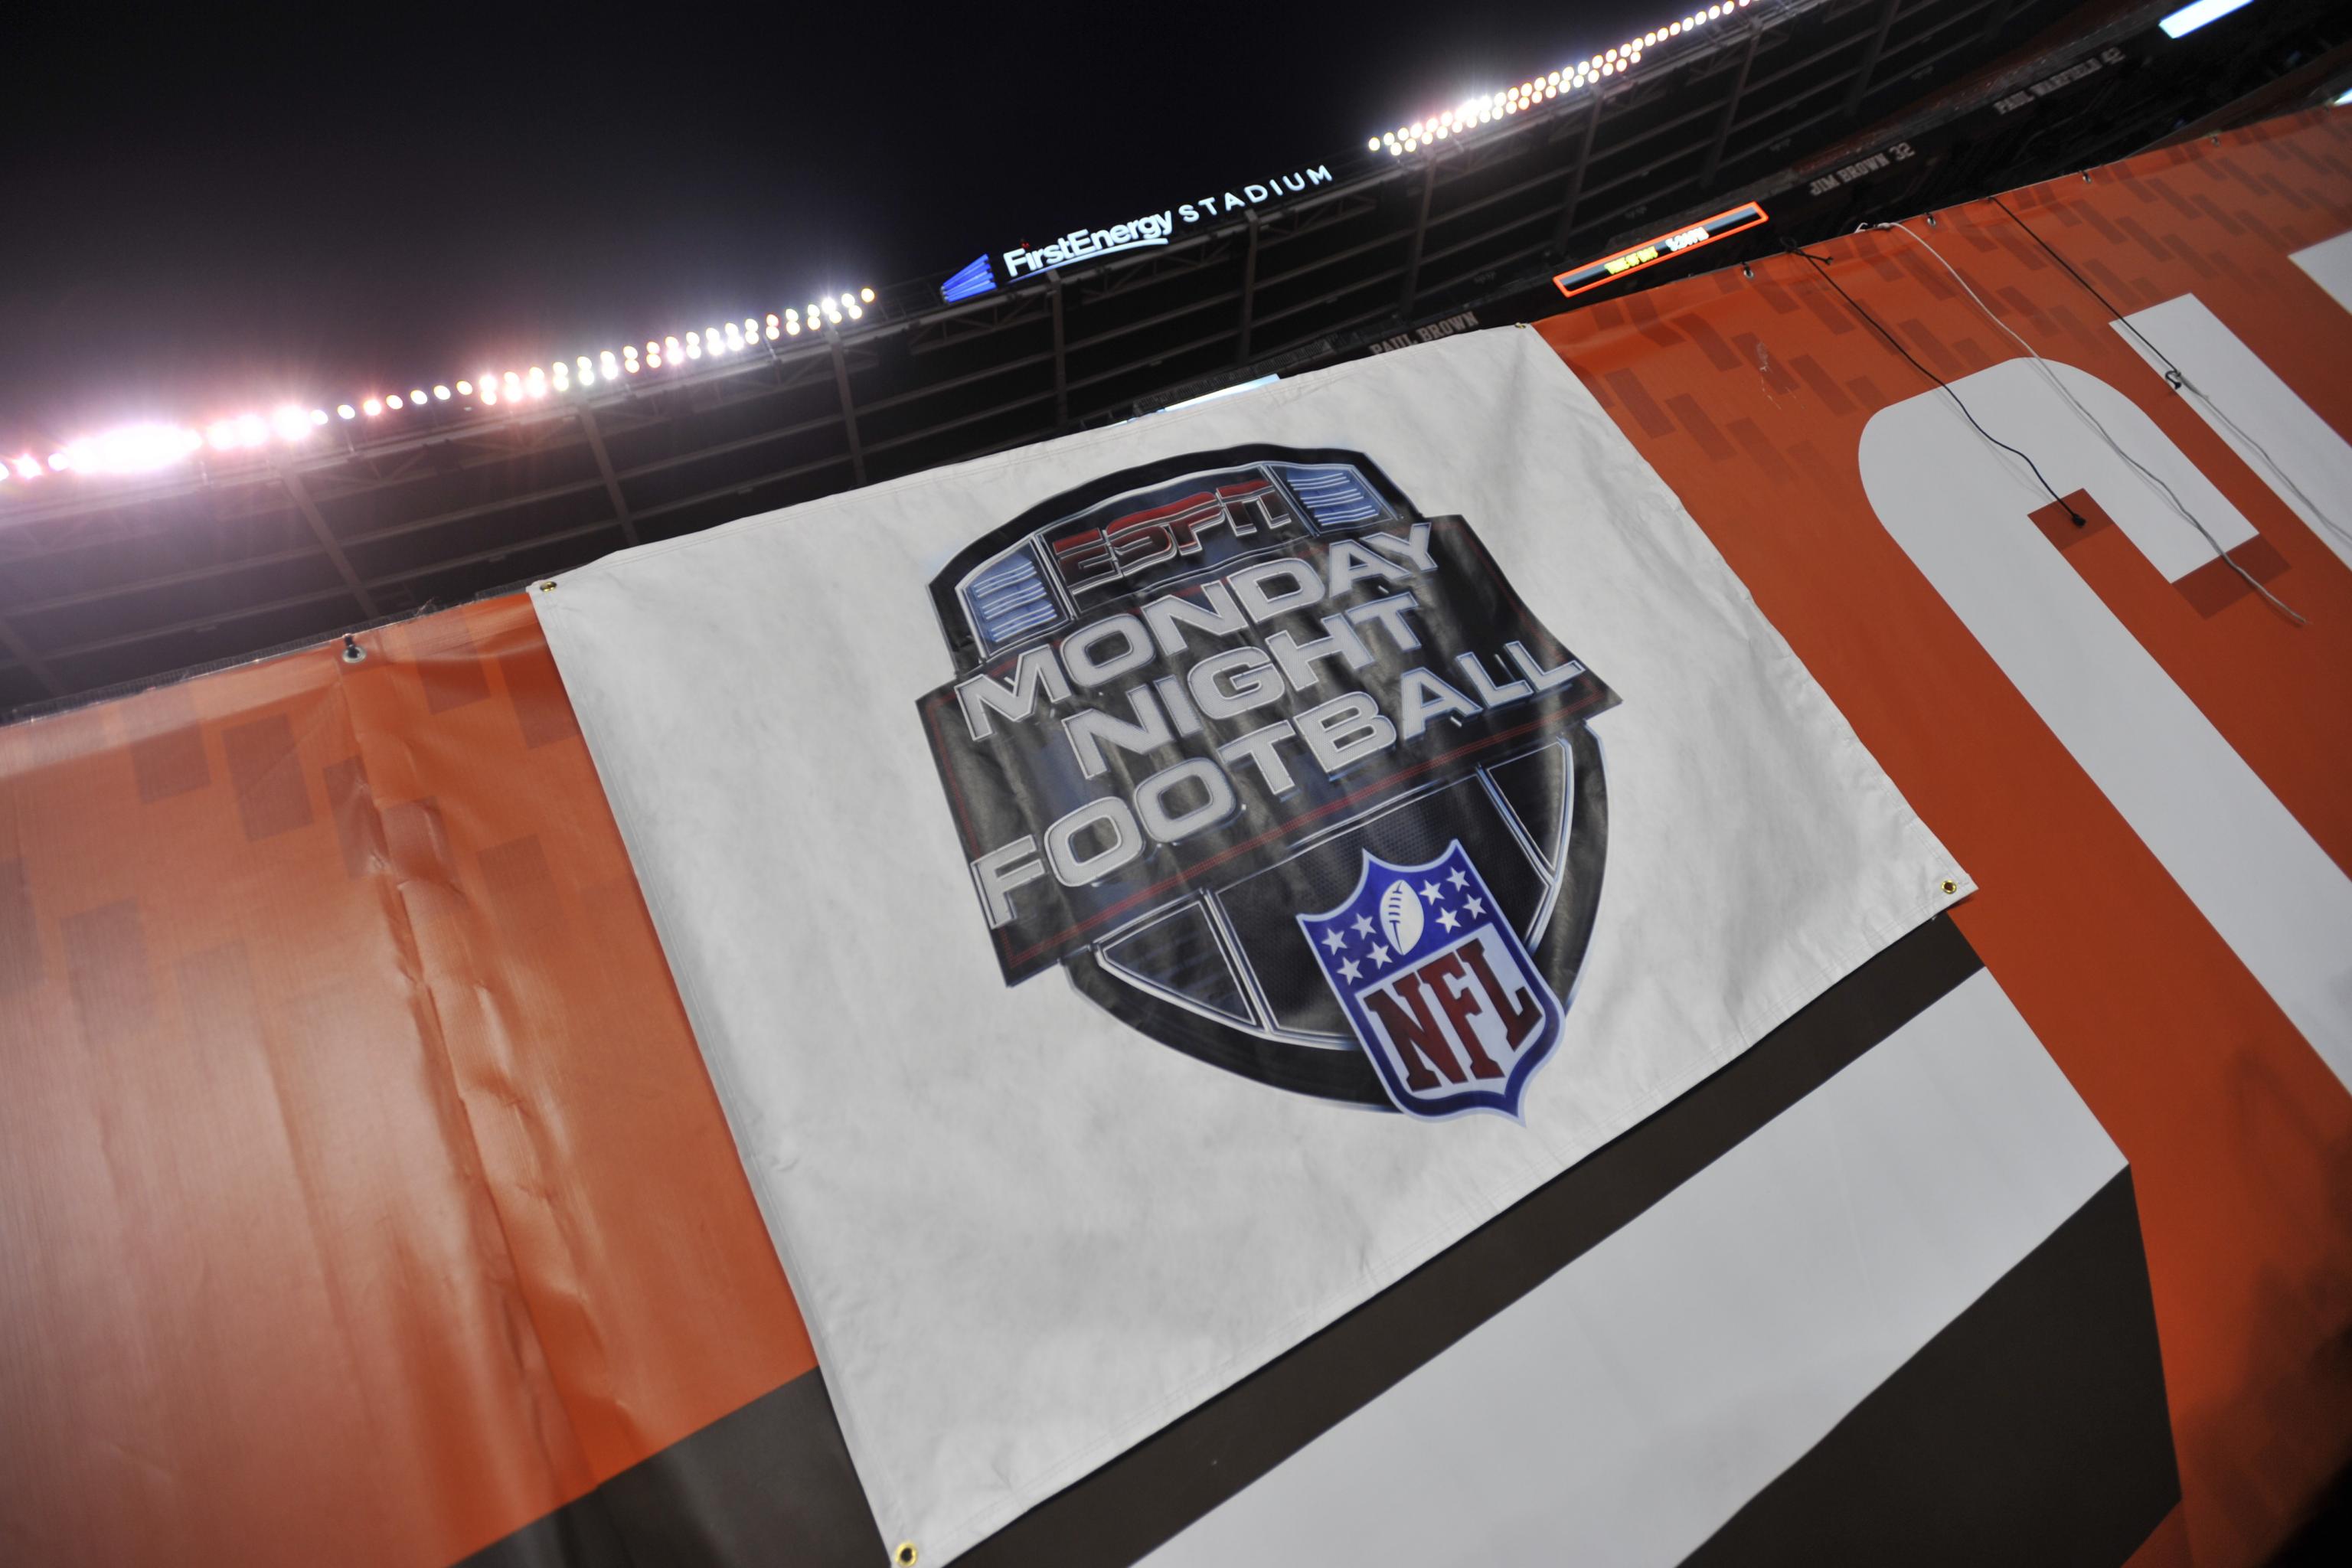 Espn Monday Night Football Radio Station - News Current Station In The Word - What Station Is Thursday Night Football On Tonight